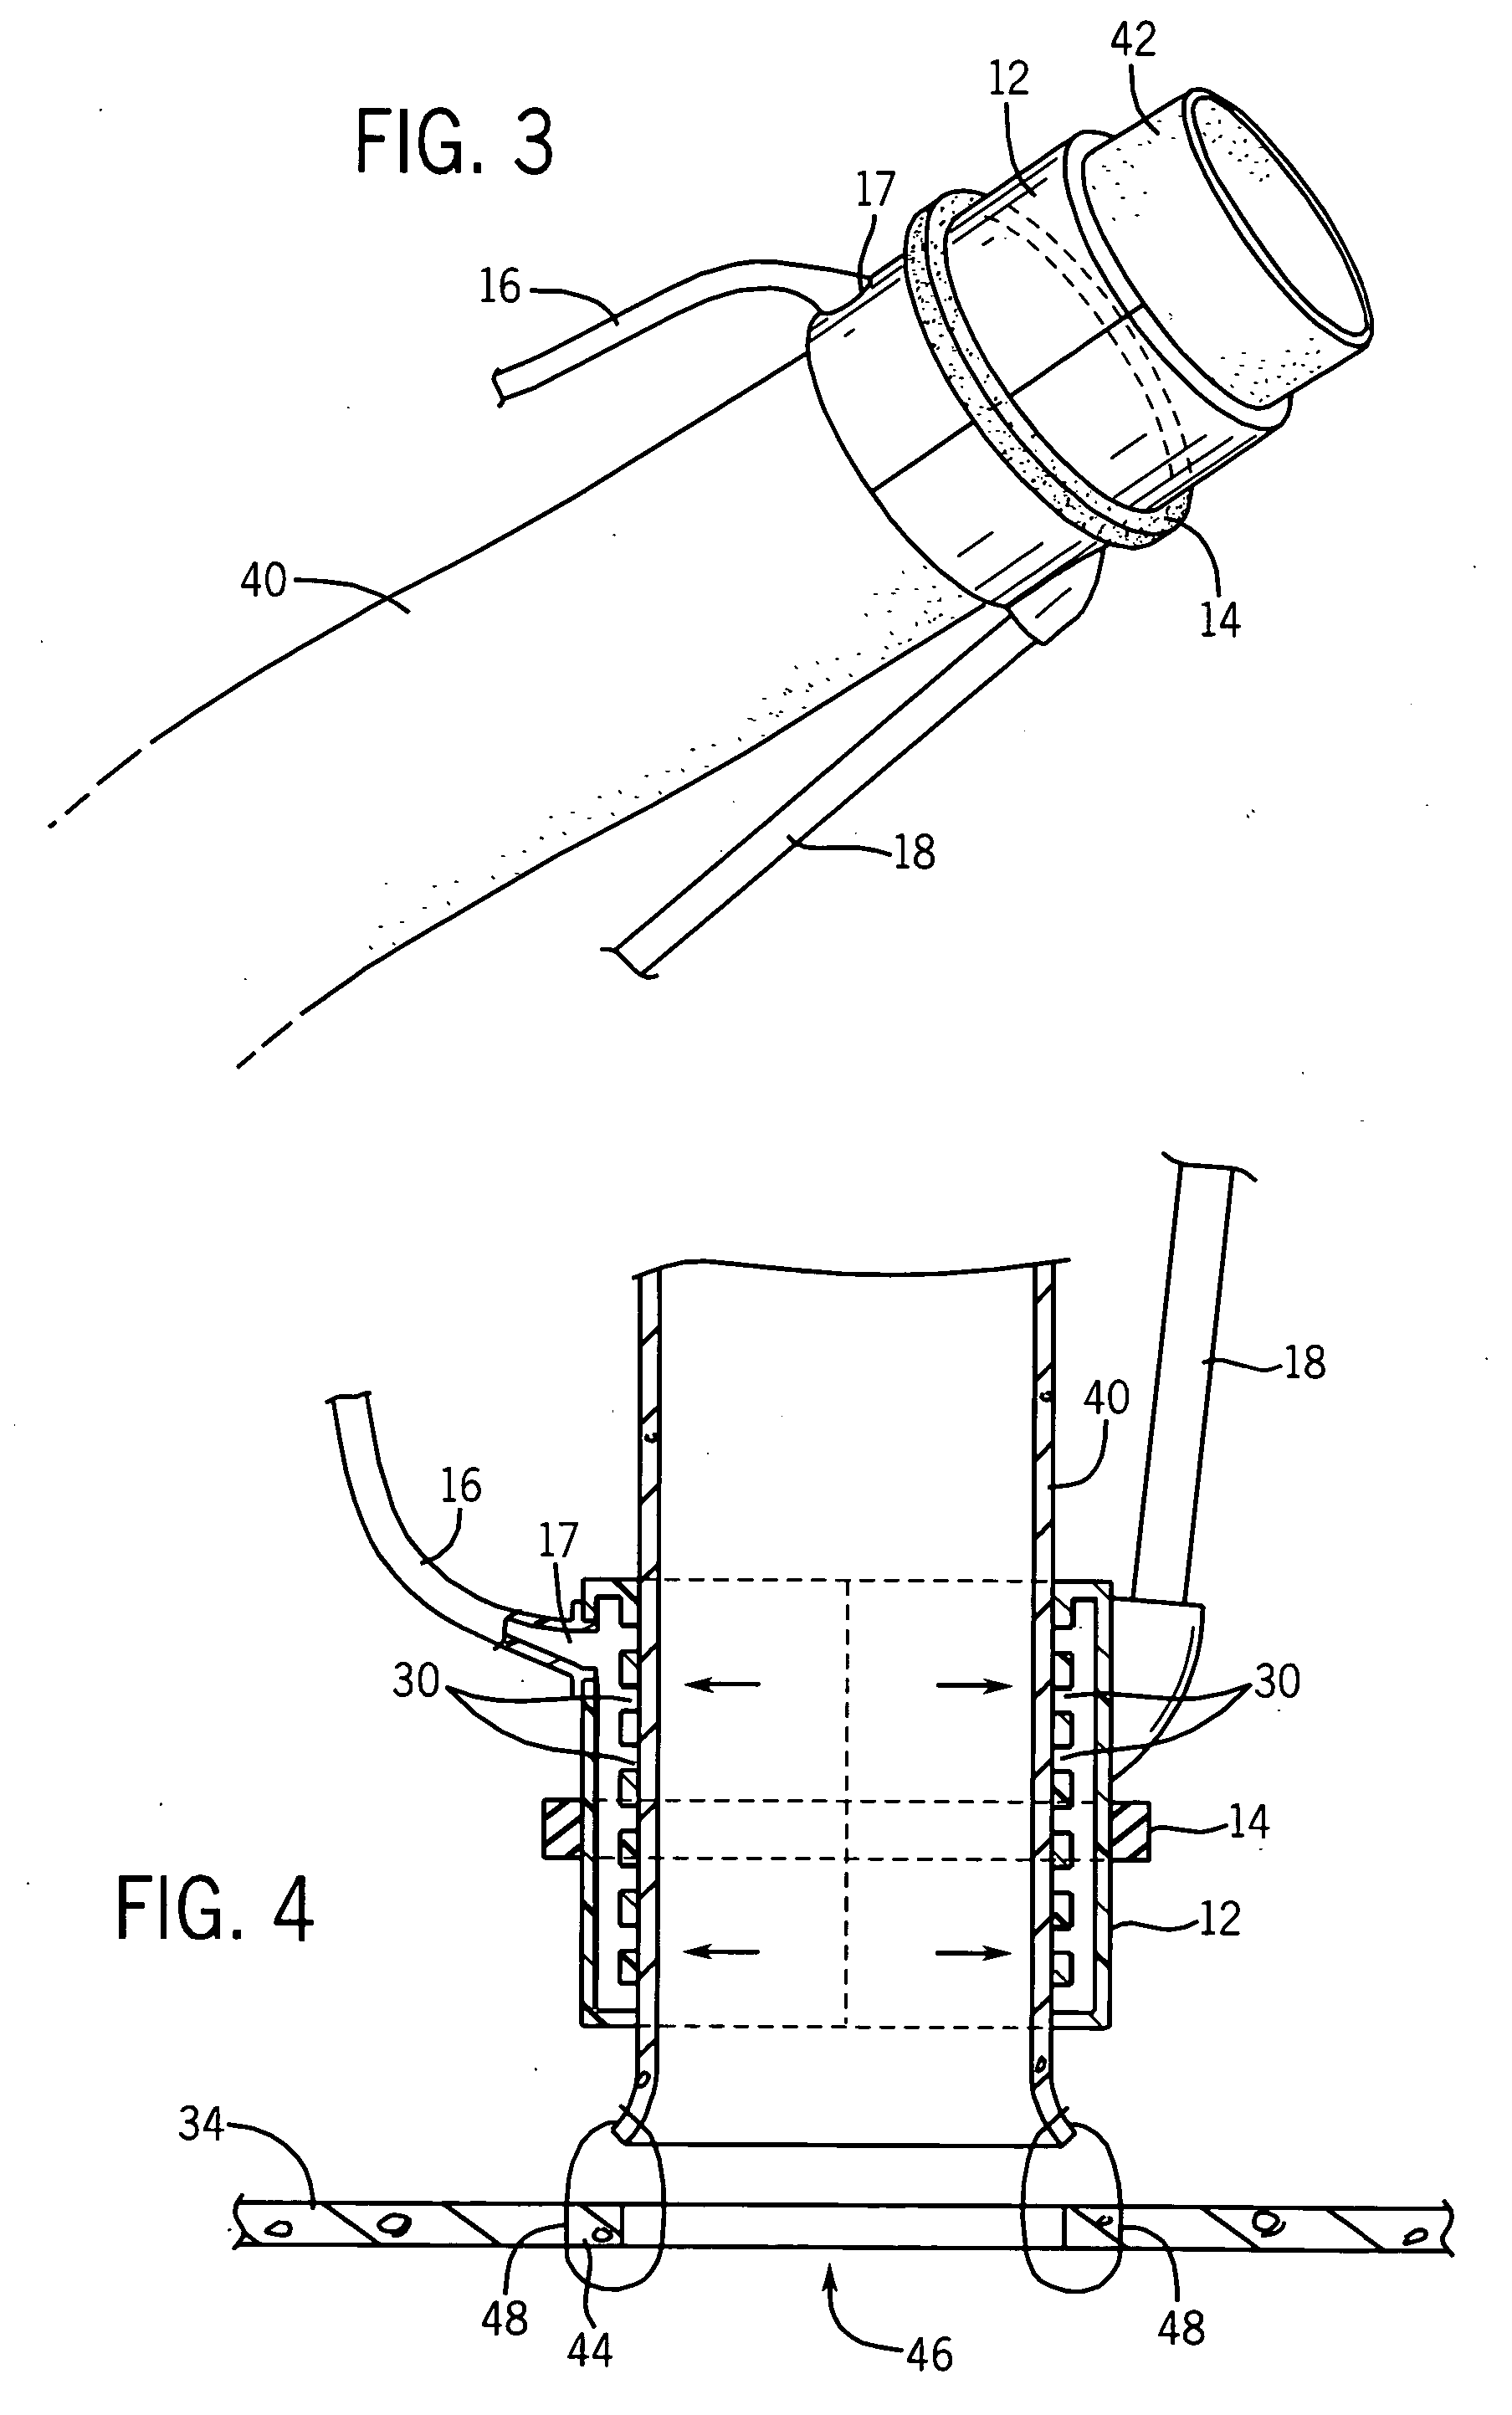 Blood vessel holding and positioning system